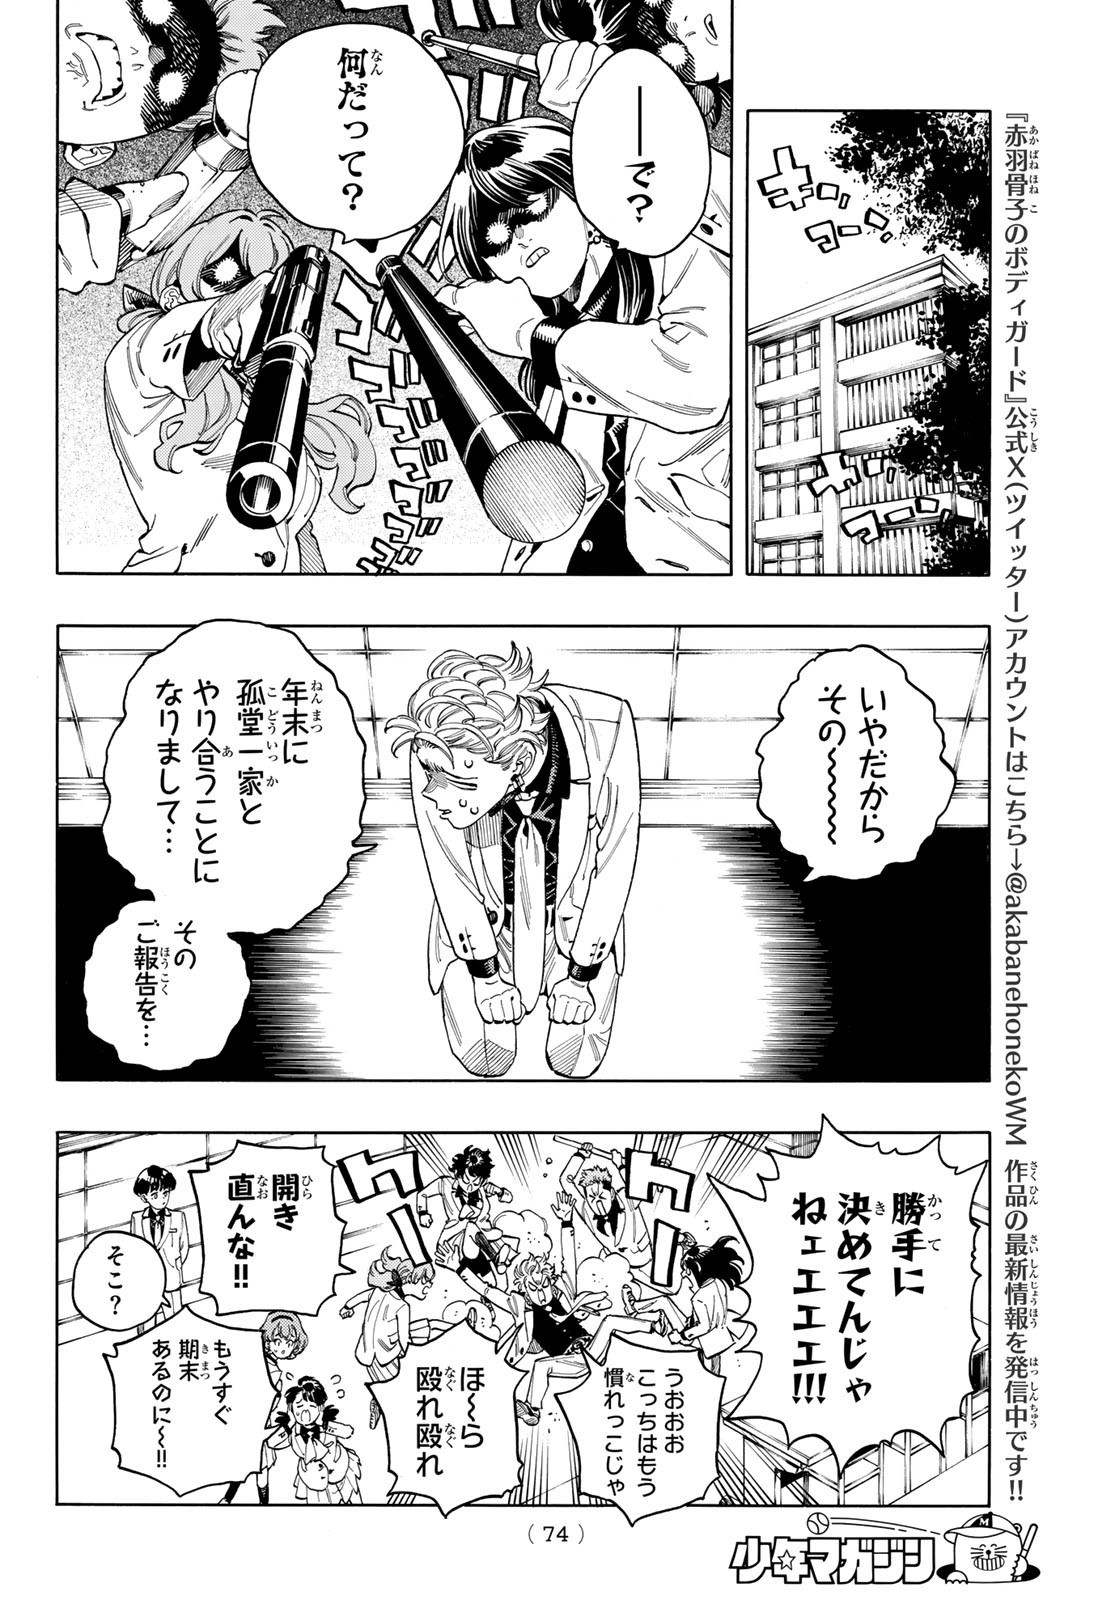 Weekly Shōnen Magazine - 週刊少年マガジン - Chapter 2024-31 - Page 73